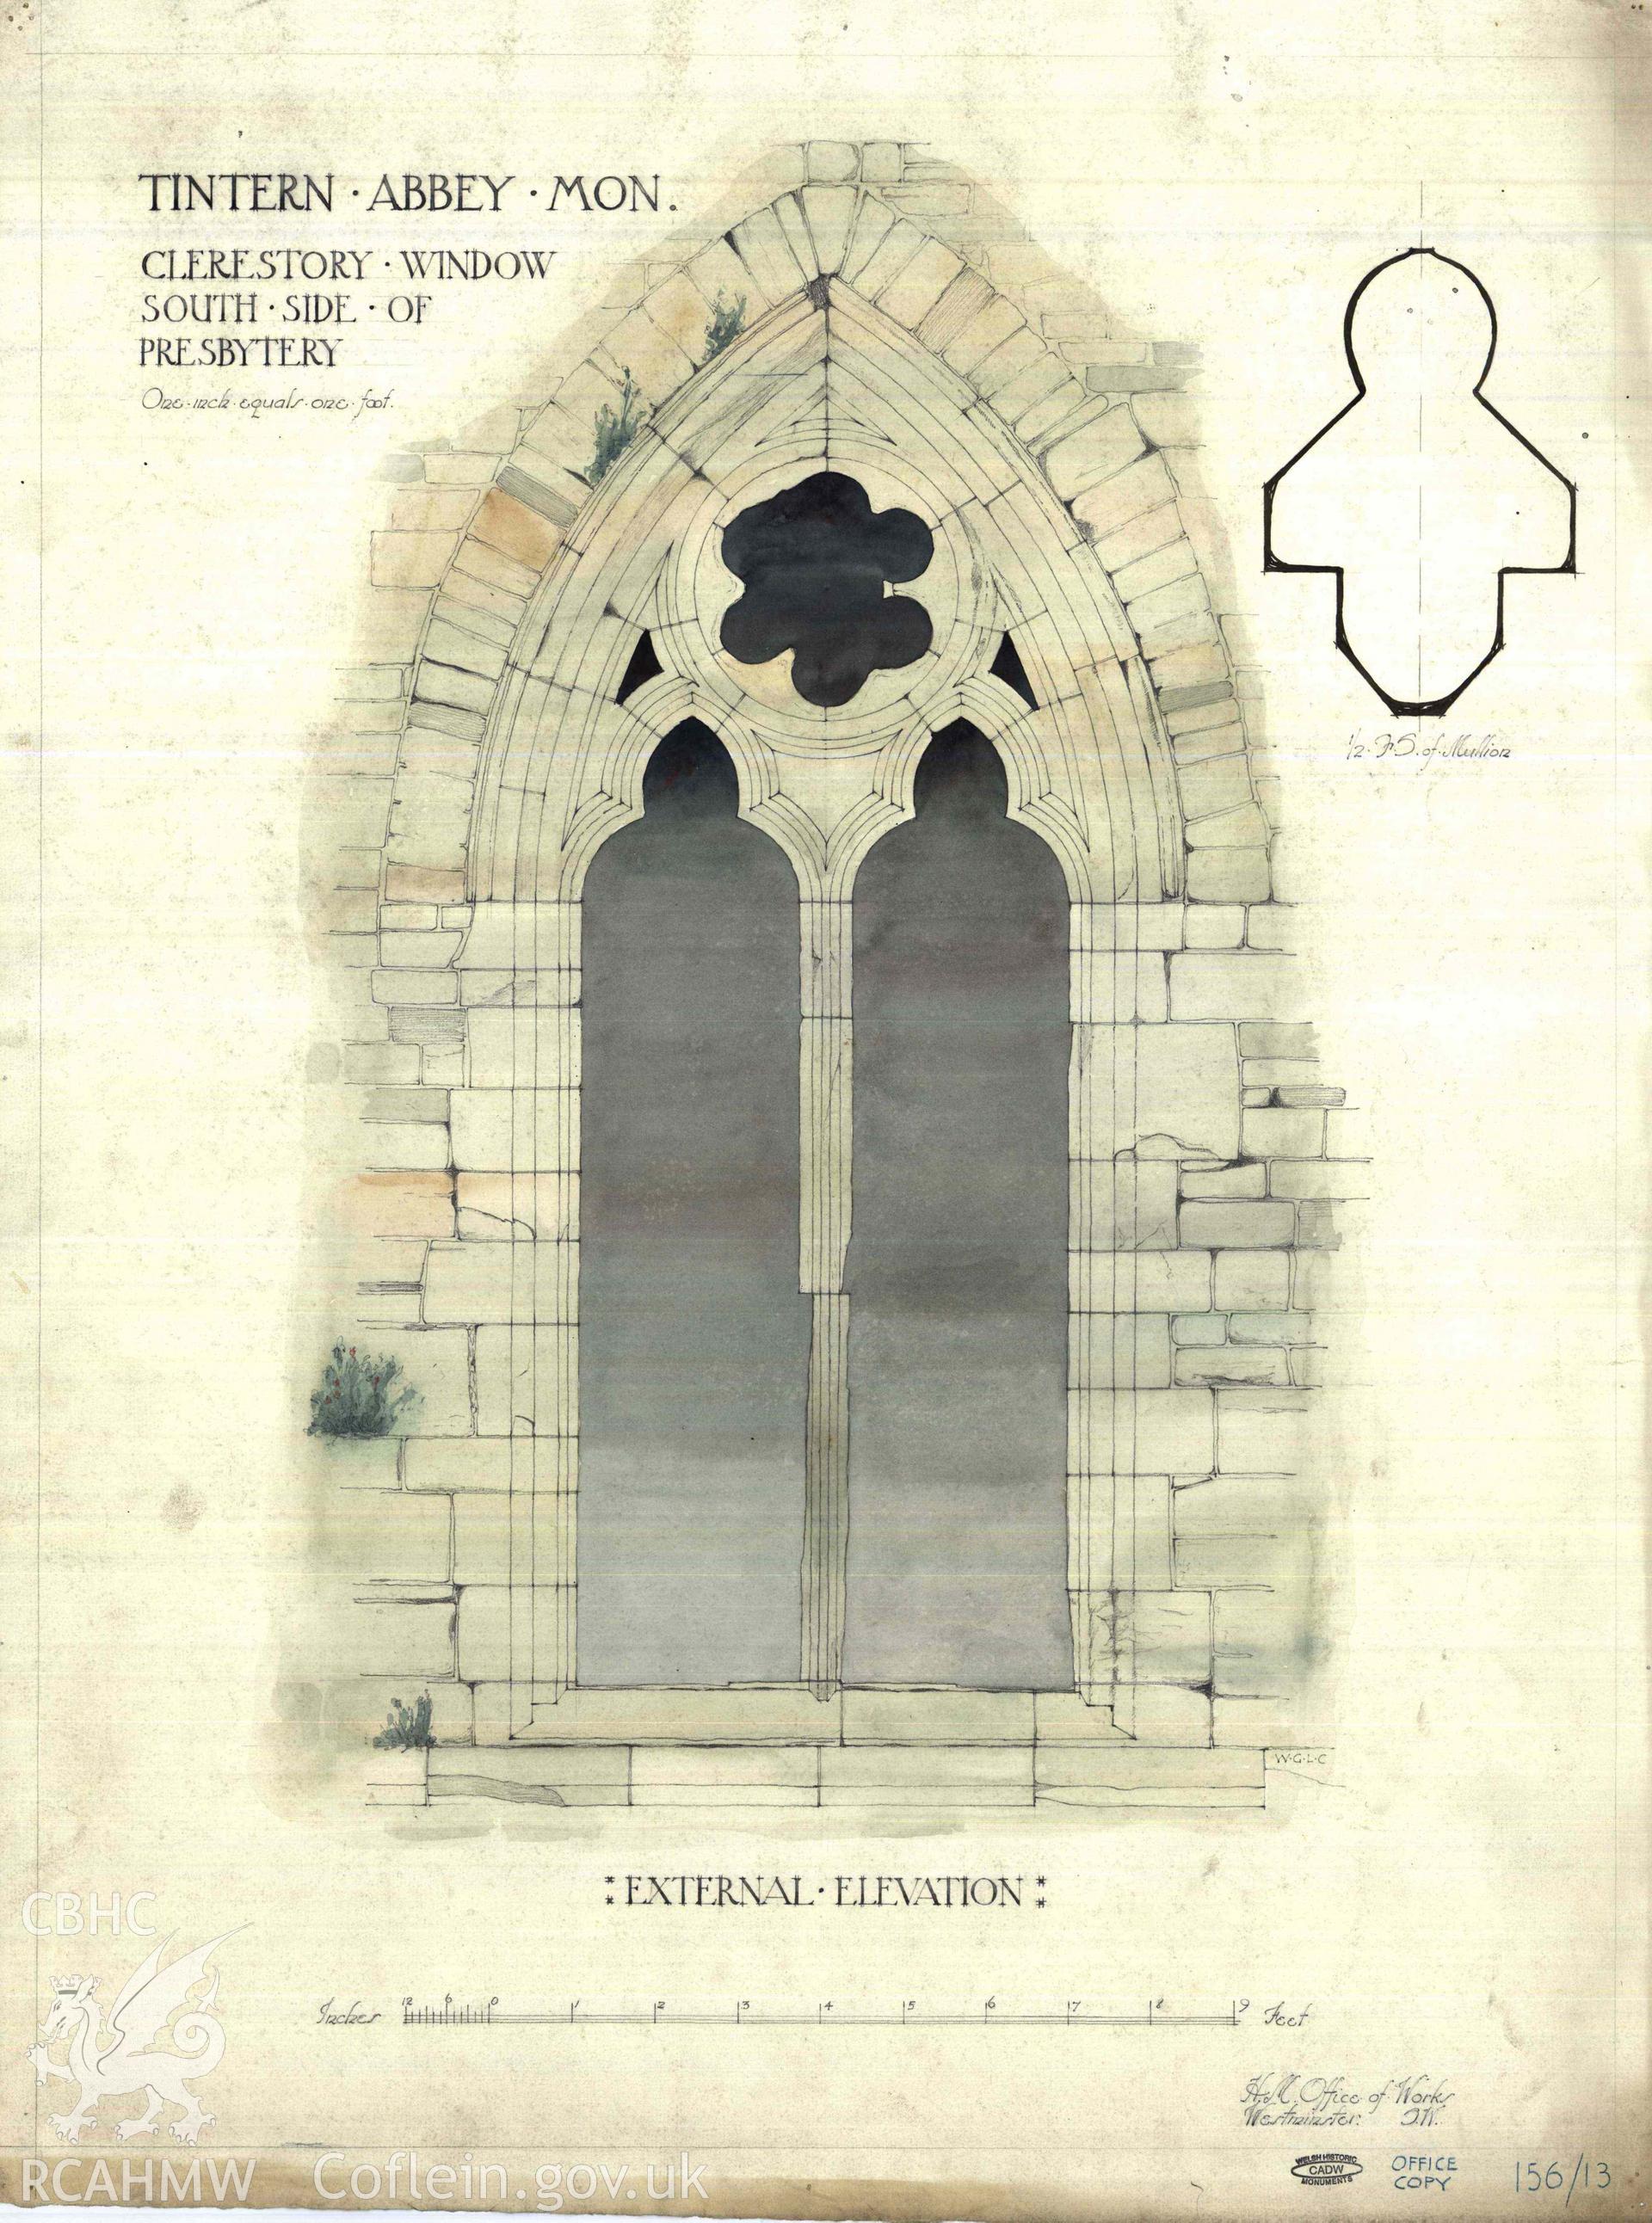 Cadw guardianship monument drawing of Tintern Abbey. Chancel clerestory window ext elves. Cadw ref. No. 156/13. Scale 1:12.2.